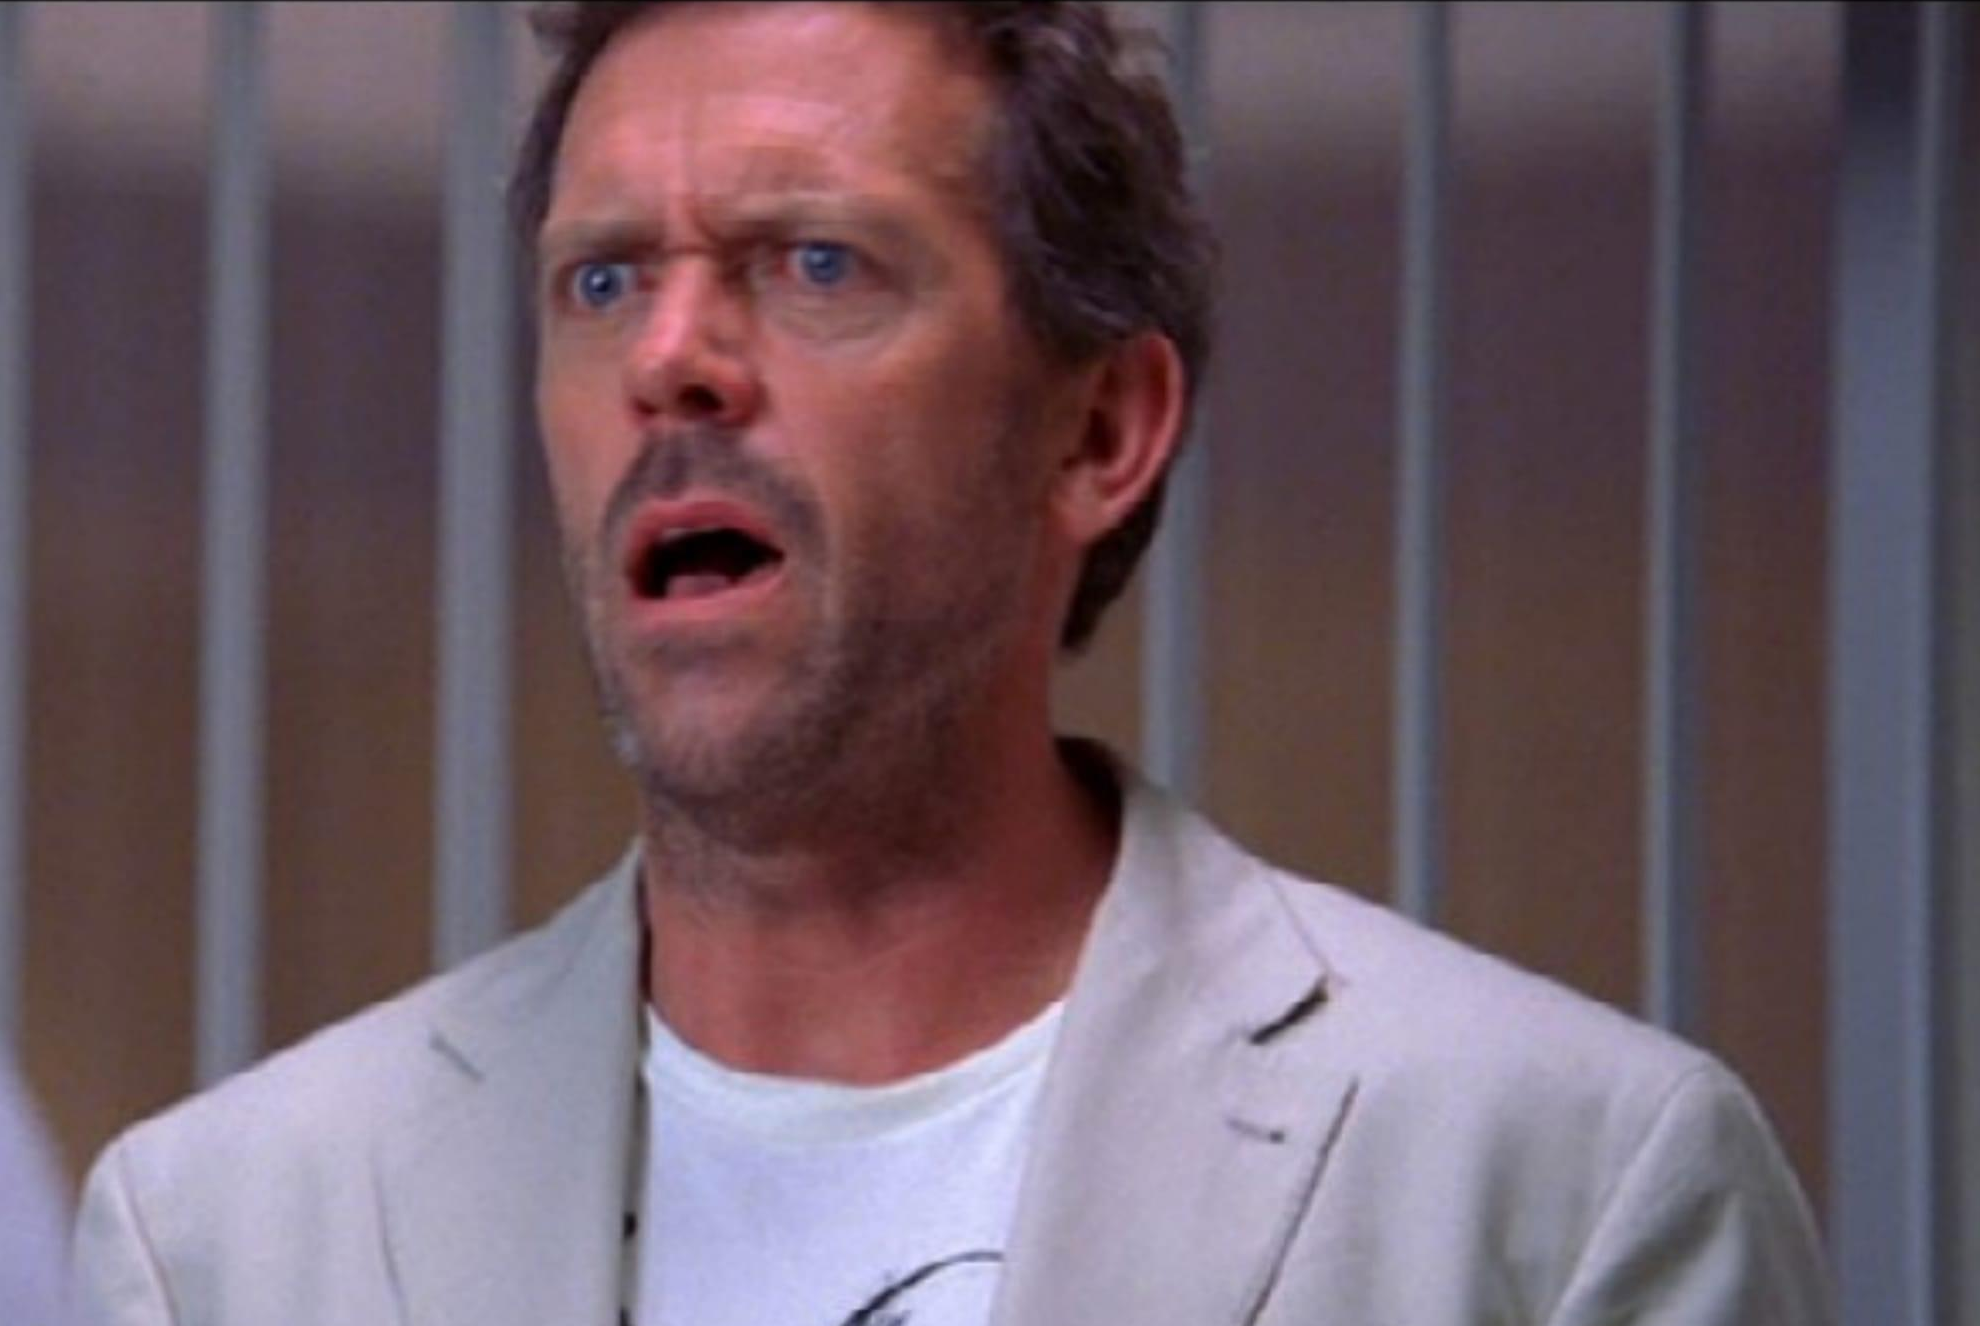 High Quality DR. HOUSE SHOCKED FACE Blank Meme Template